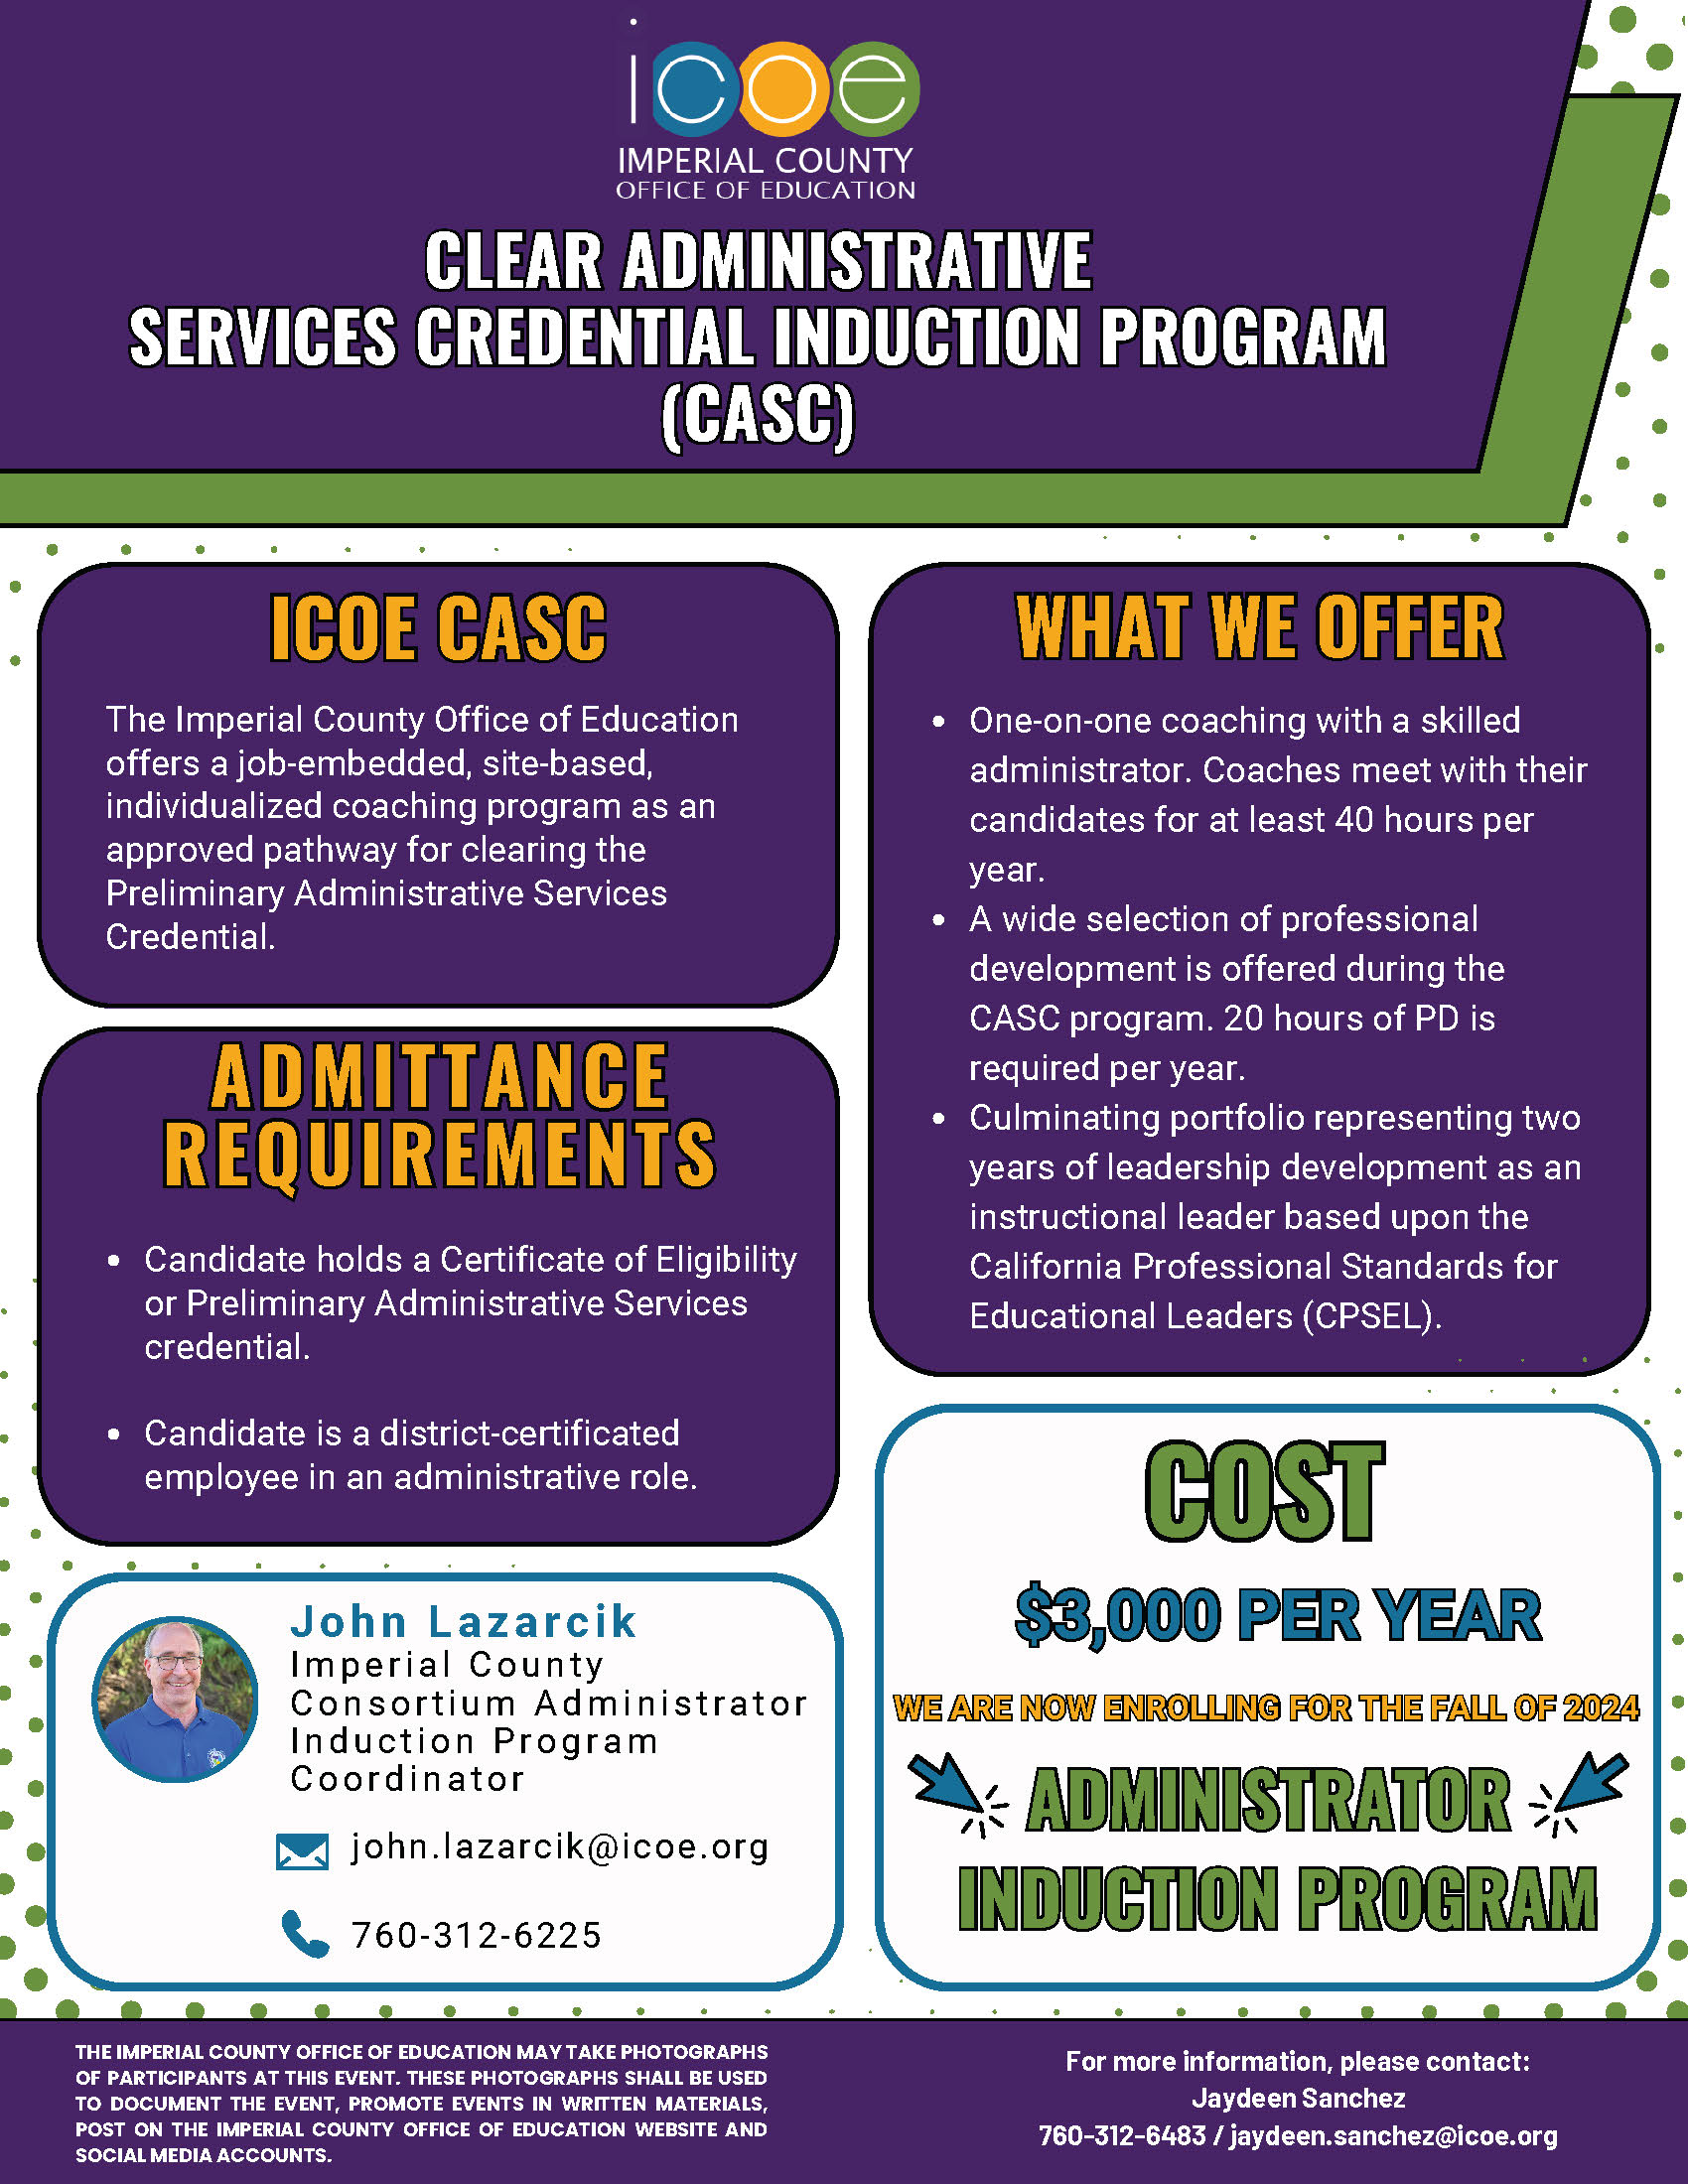 Clear Administrative Services Credential Induction Program (CASC) Flyer